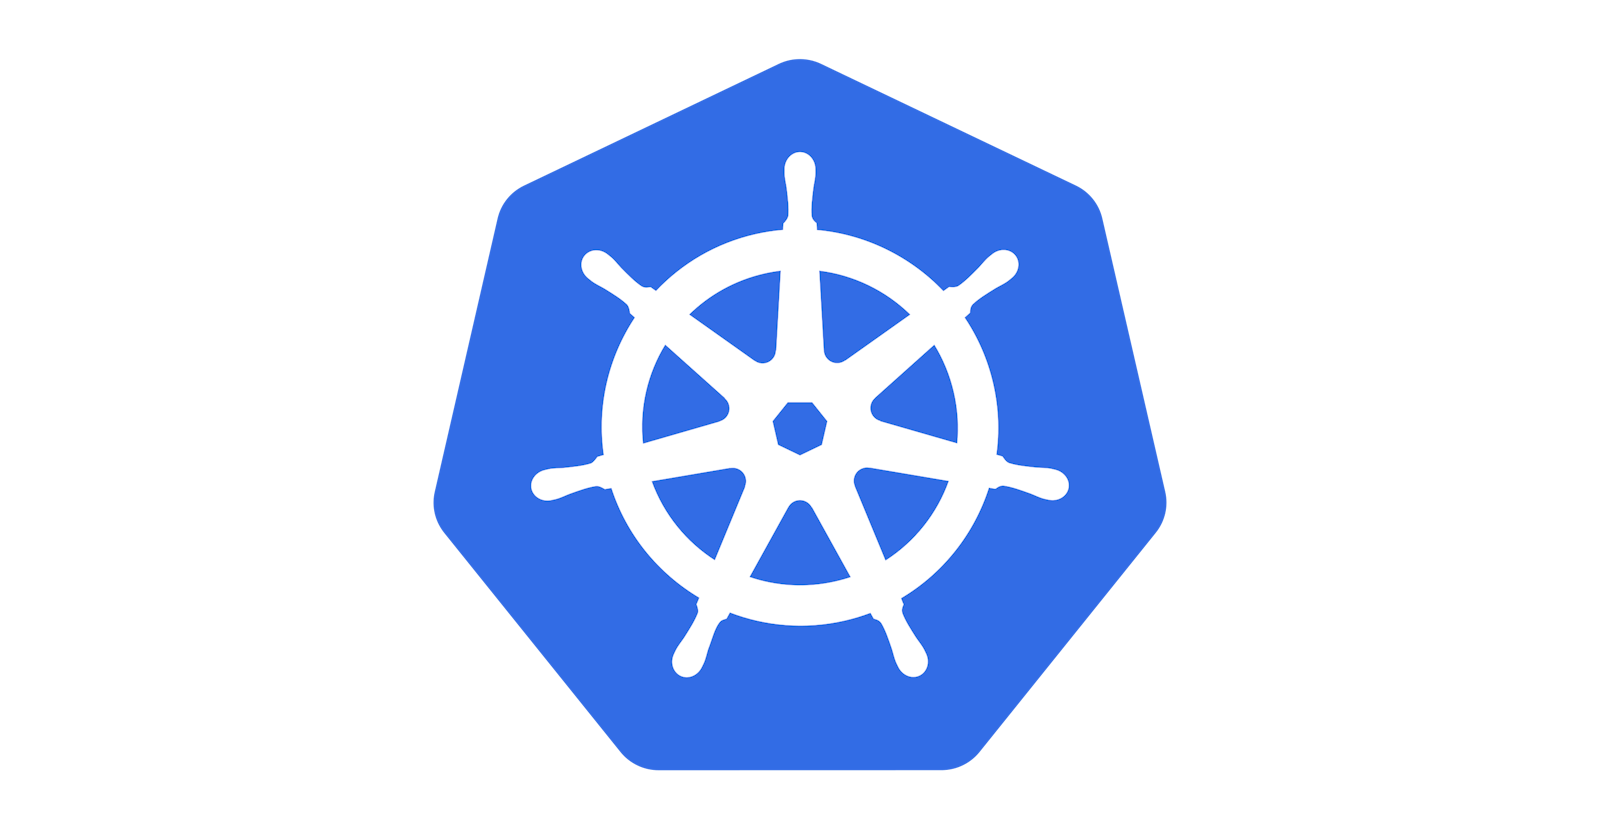 Here's how Kubernetes makes your life easy